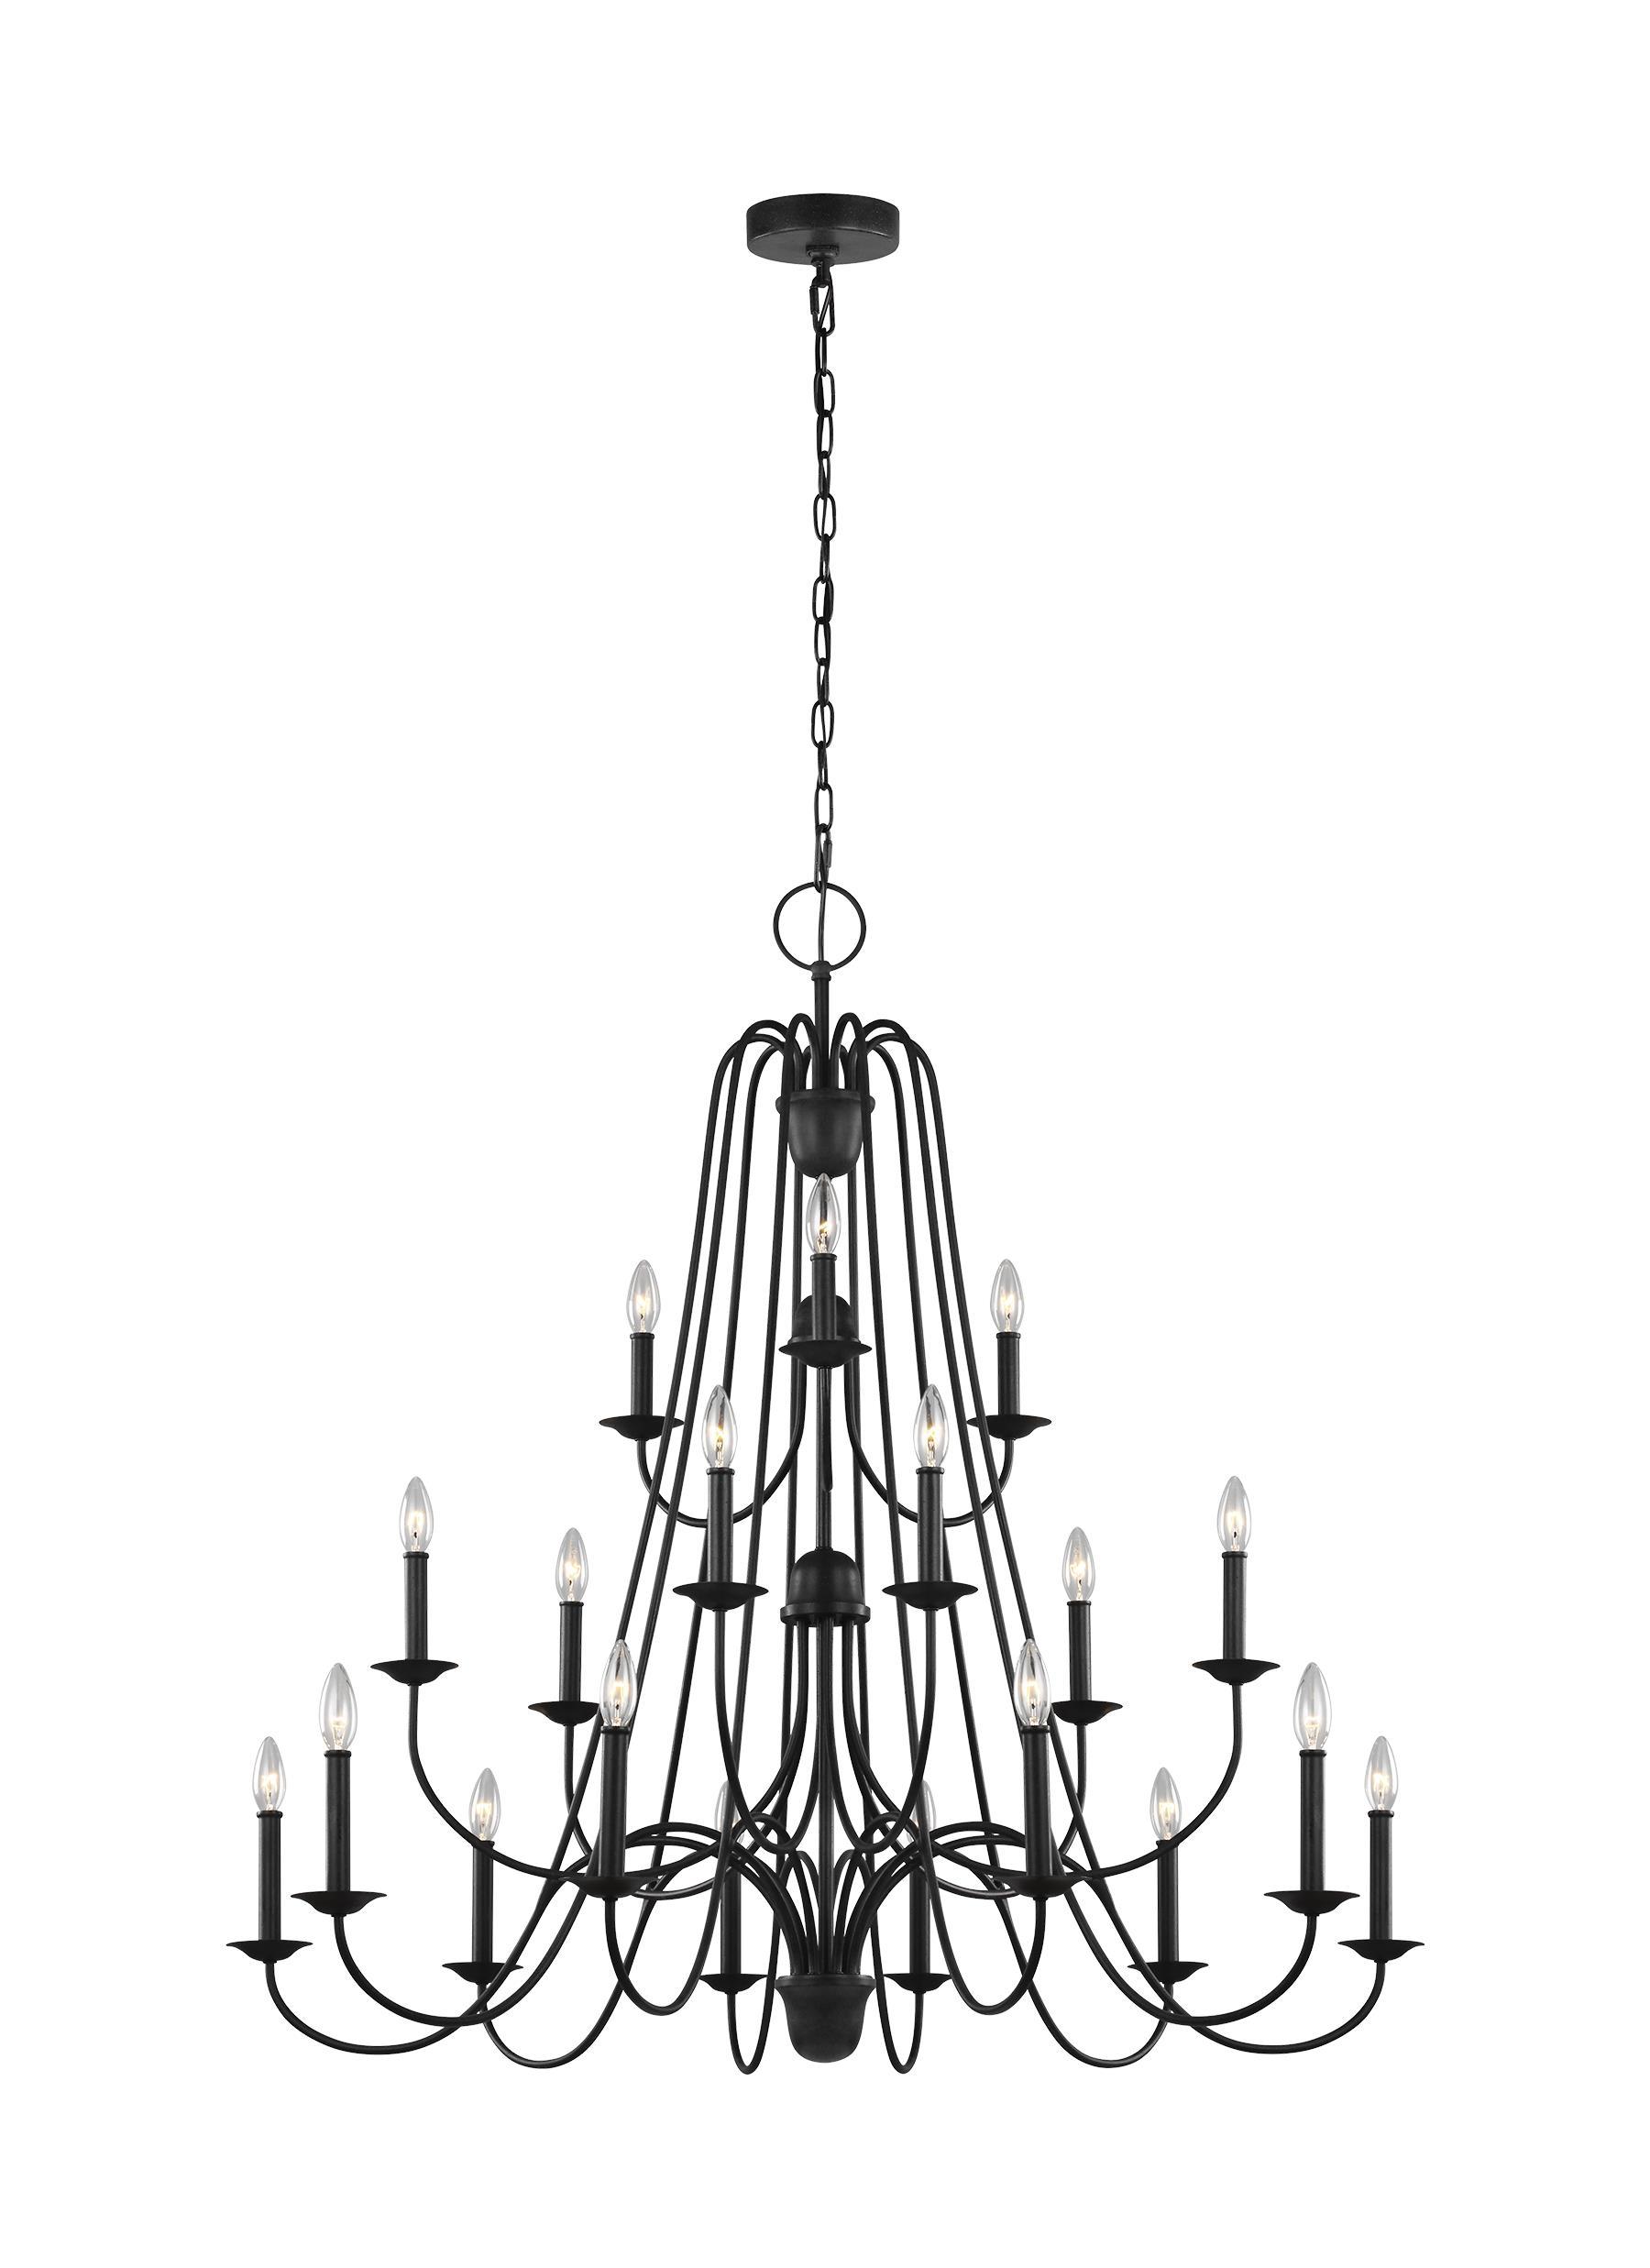 Boughton Eighteen Light Chandelier - Antique Forged Iron Ceiling Sea Gull Lighting 